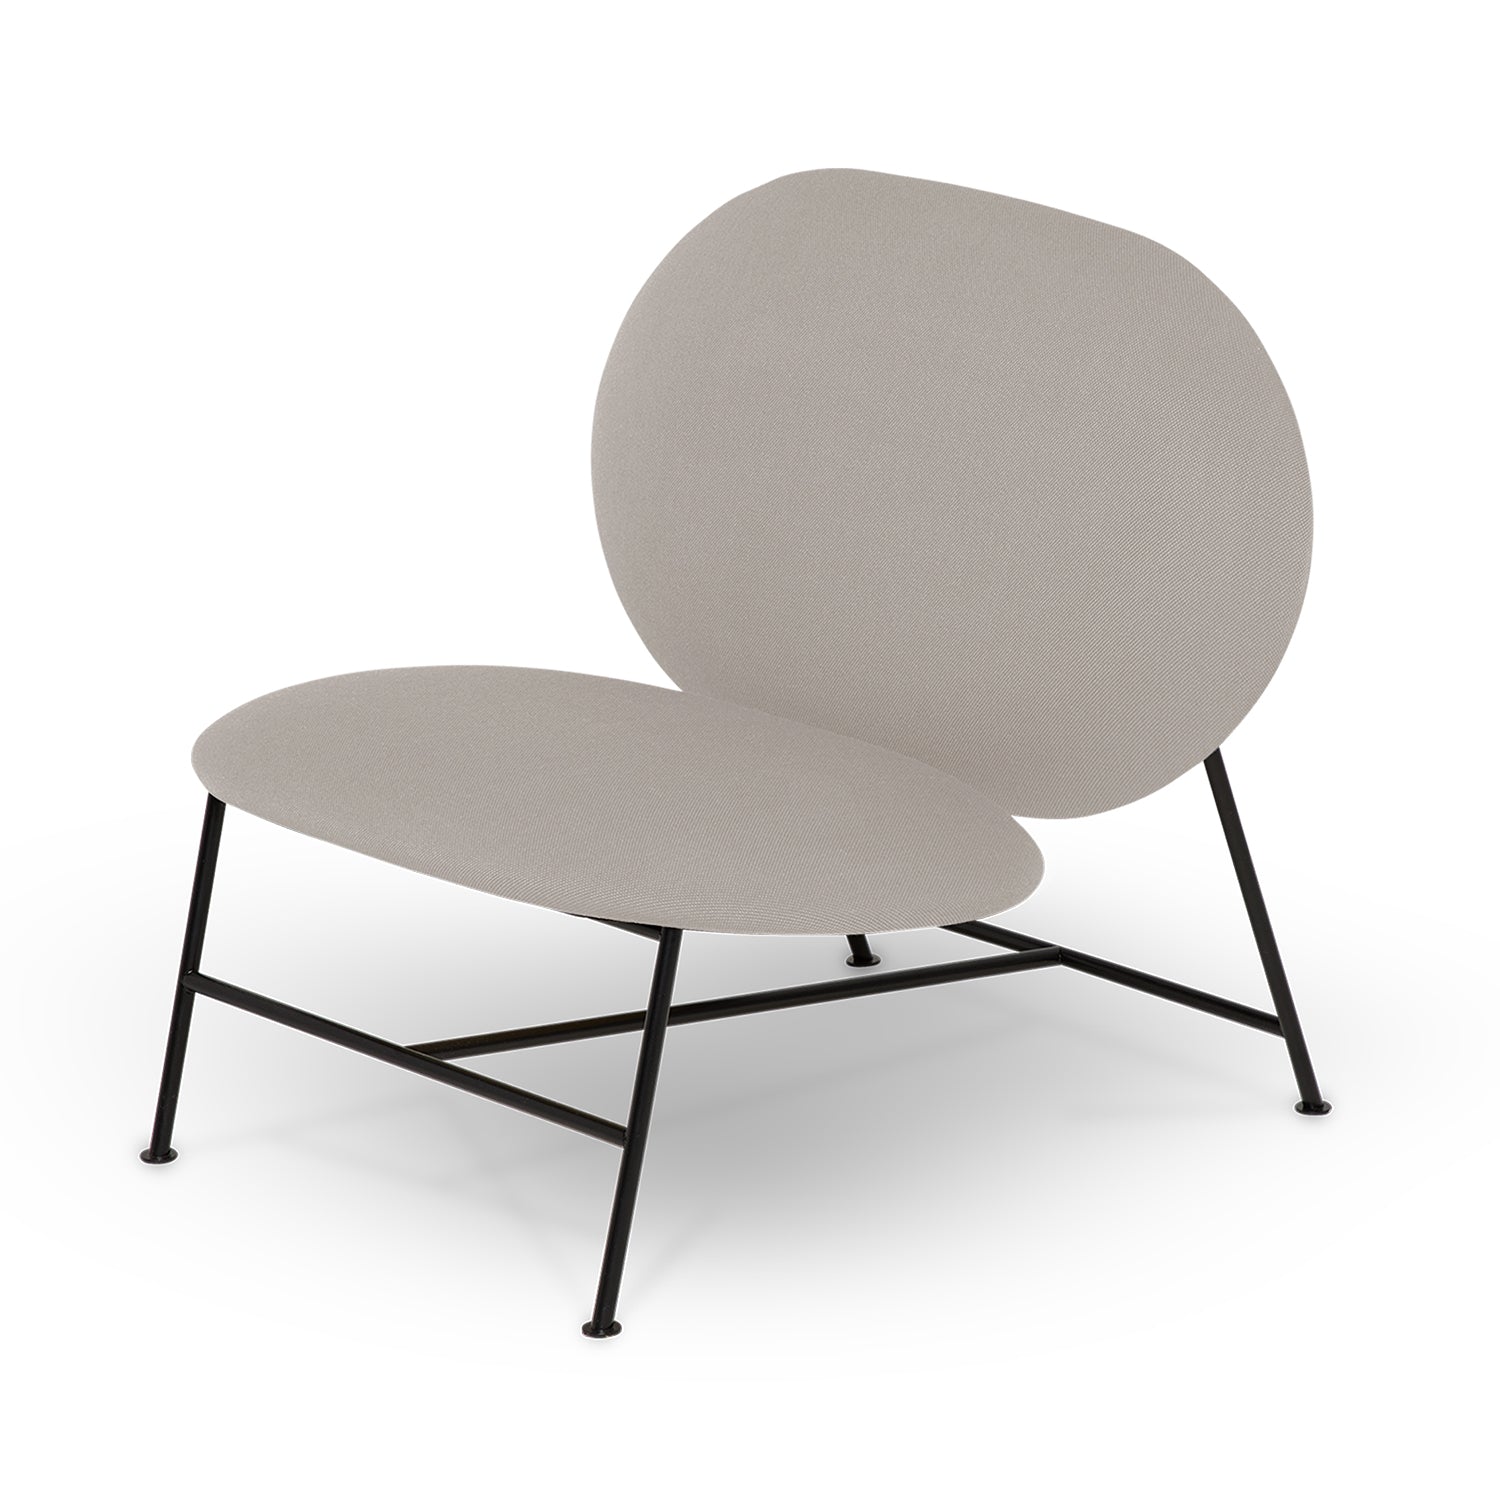 Northern Oblong Lounge Chair in Warm Light Grey